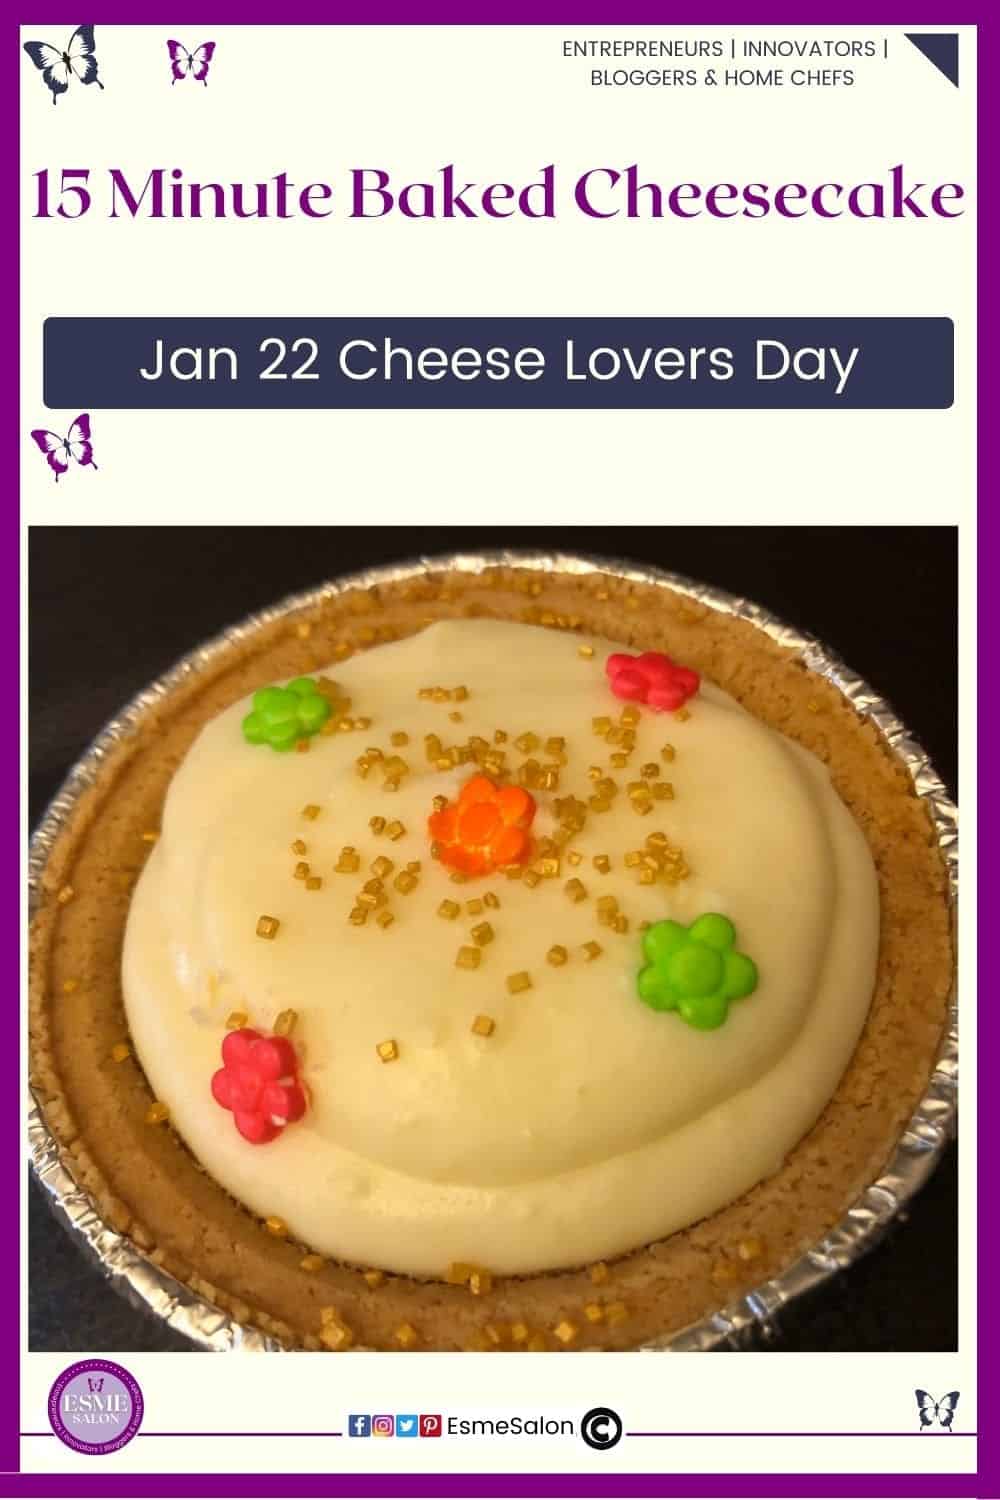 an image of a single serving 15 Minute Baked Cheesecake with colored candy flower shaped decorations